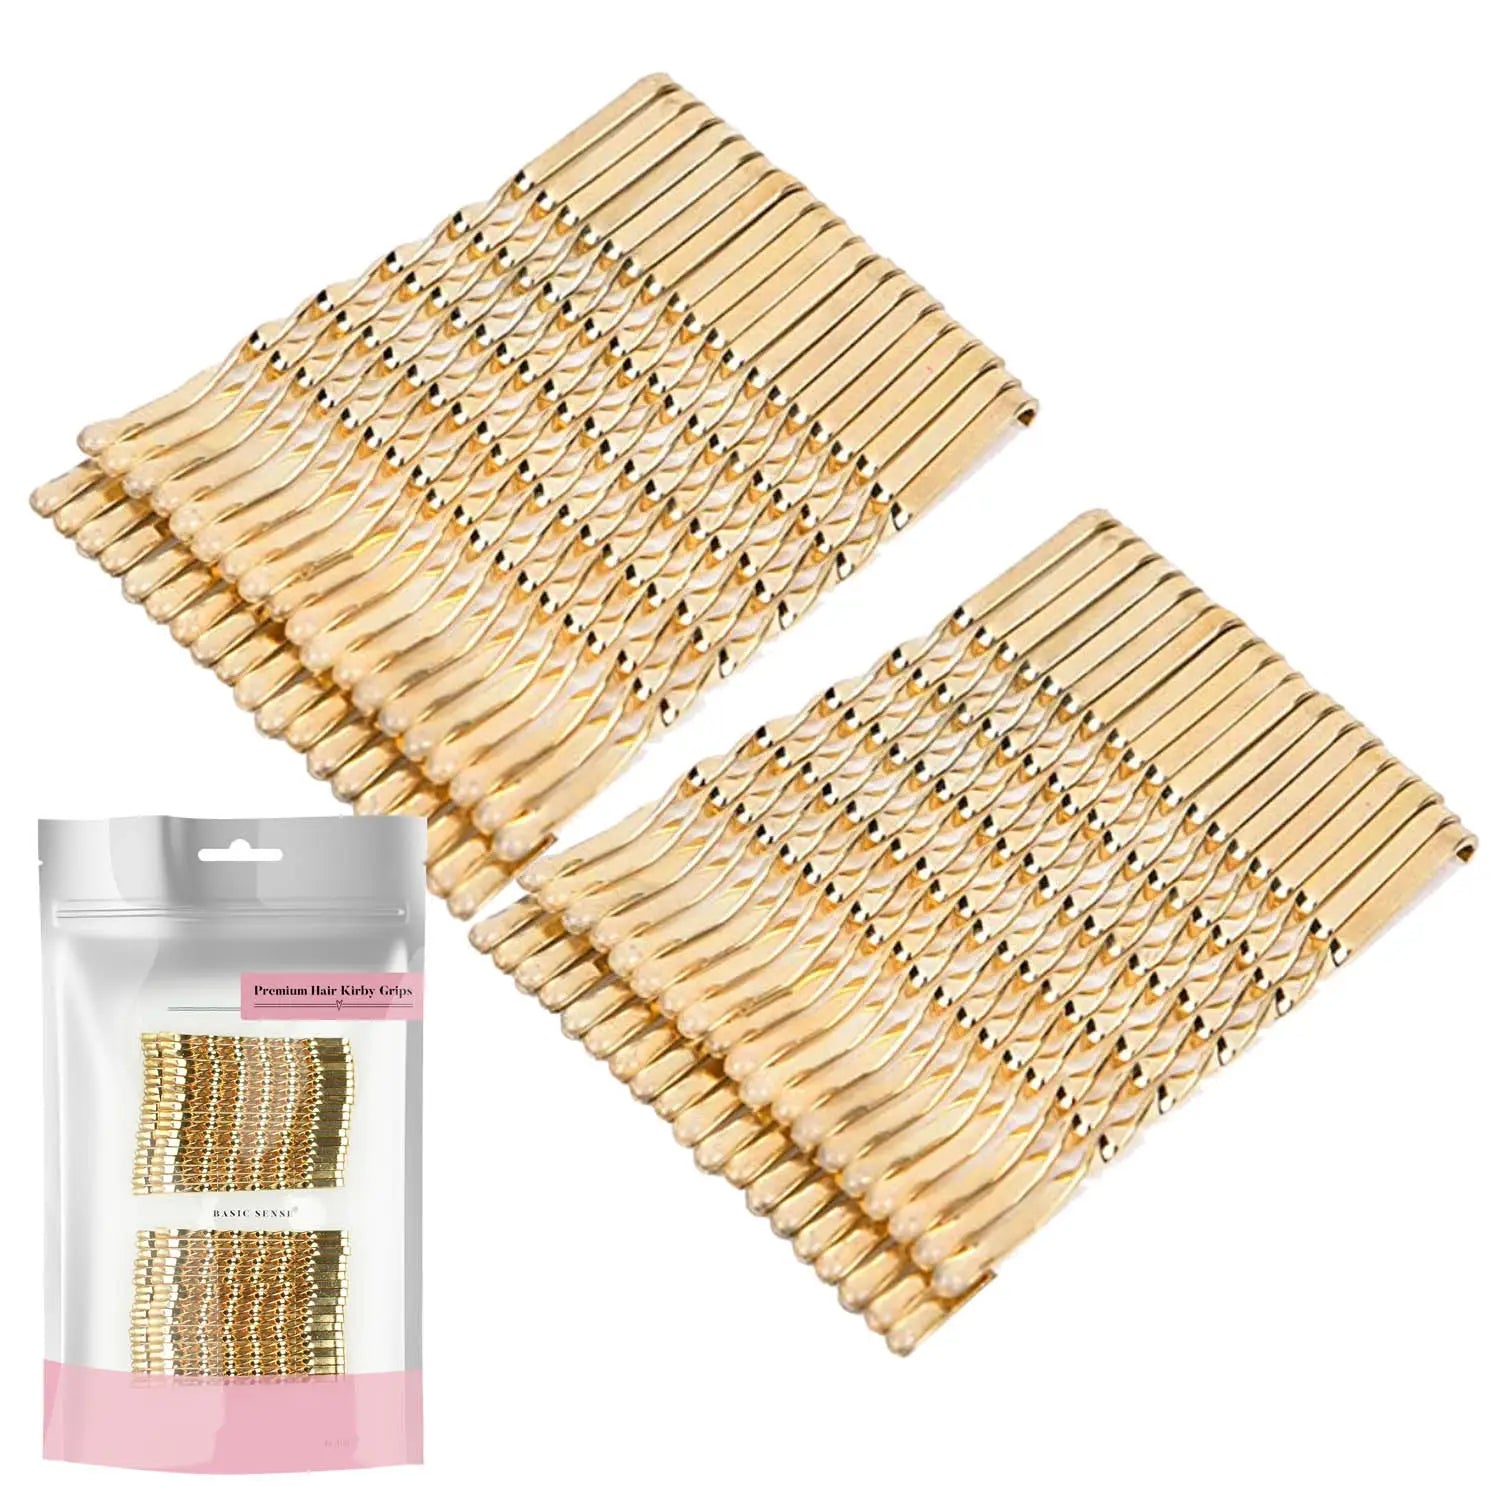 Twisted Kirby Metal Bobby Hair Grips - 36pcs with straws and sticks.